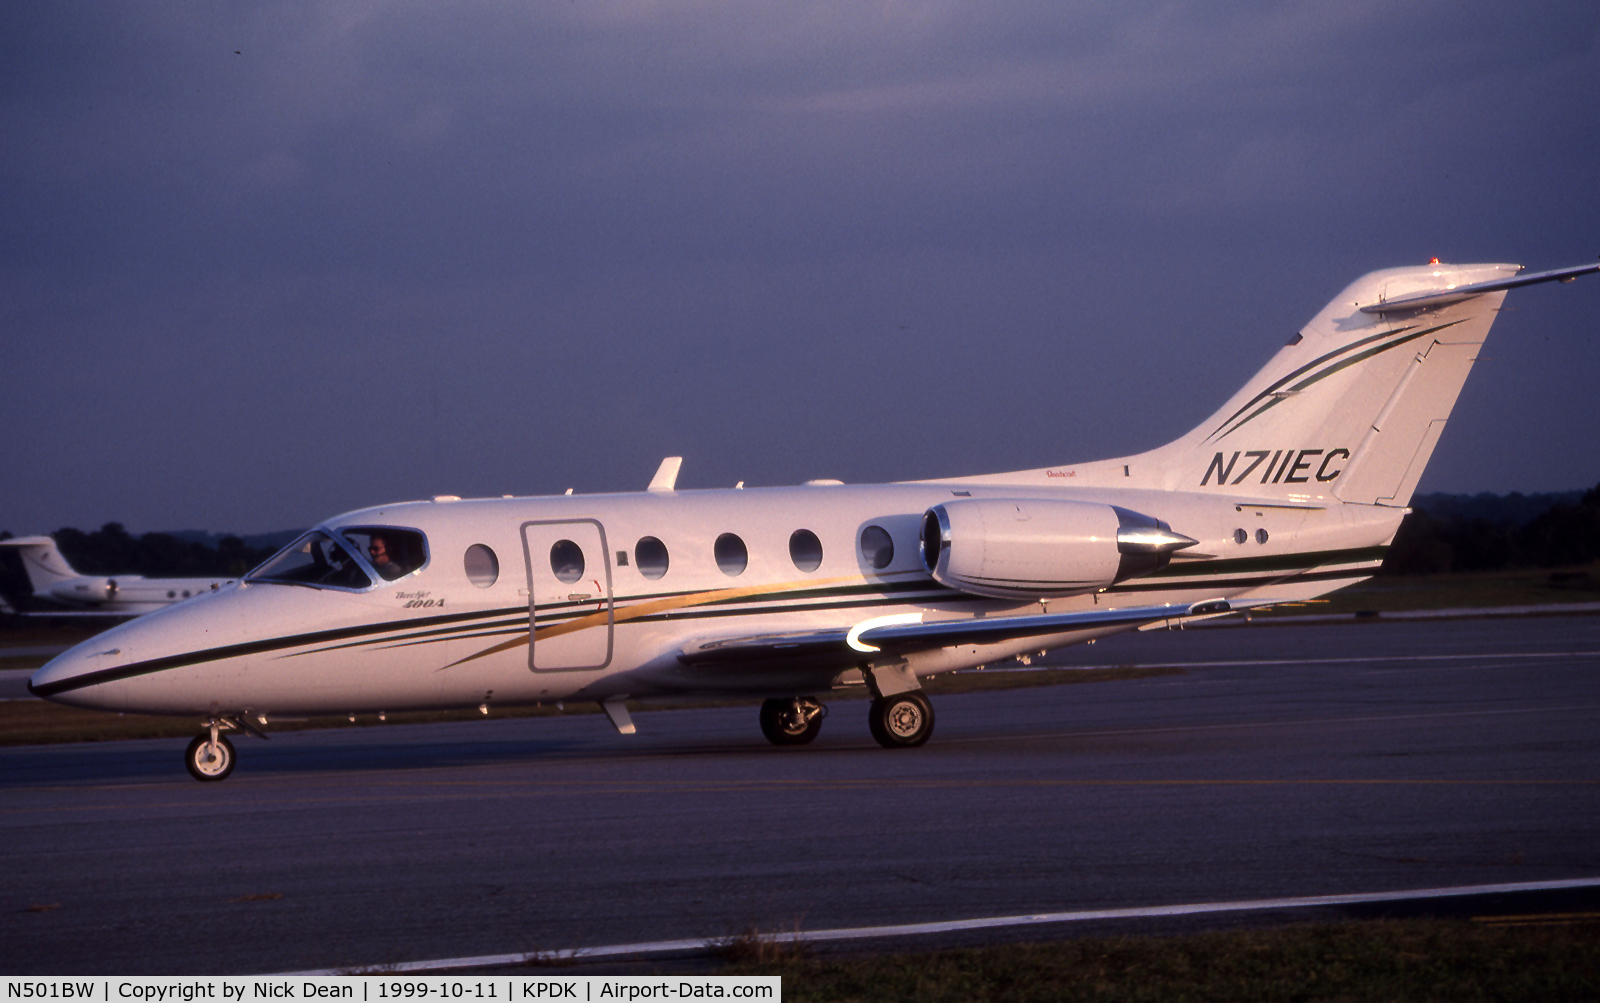 N501BW, 1997 Raytheon Aircraft Company 400A C/N RK-167, KPDK (Seen here as N711EC and currently registered N501BW as posted)